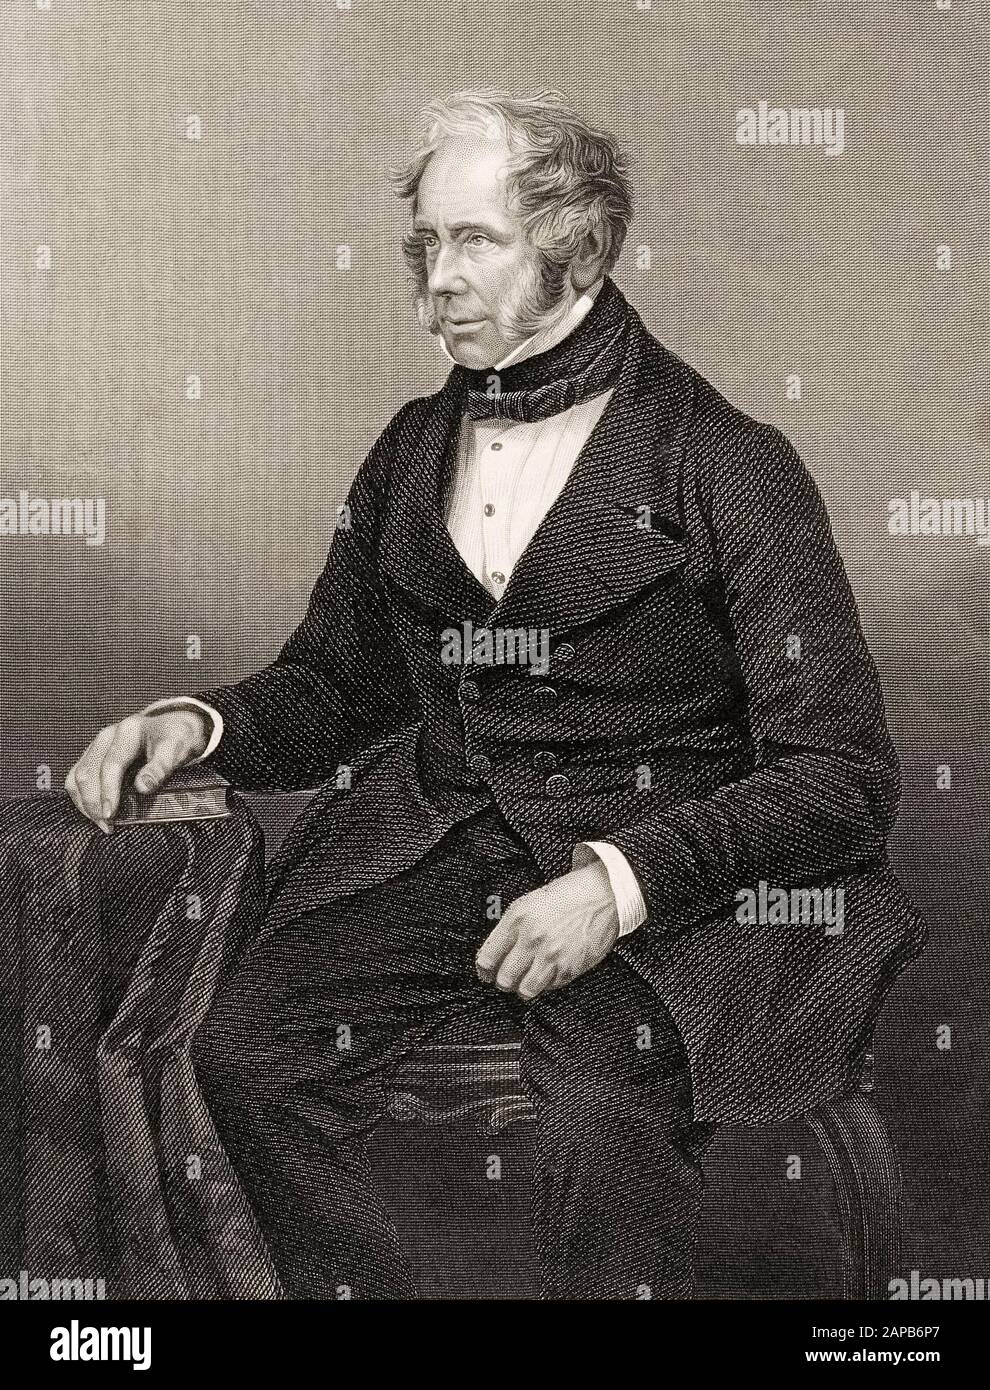 Lord Palmerston, Henry John Temple, 3rd Viscount Palmerston (1784-1865), portrait engraving, 1860-1870 Stock Photo